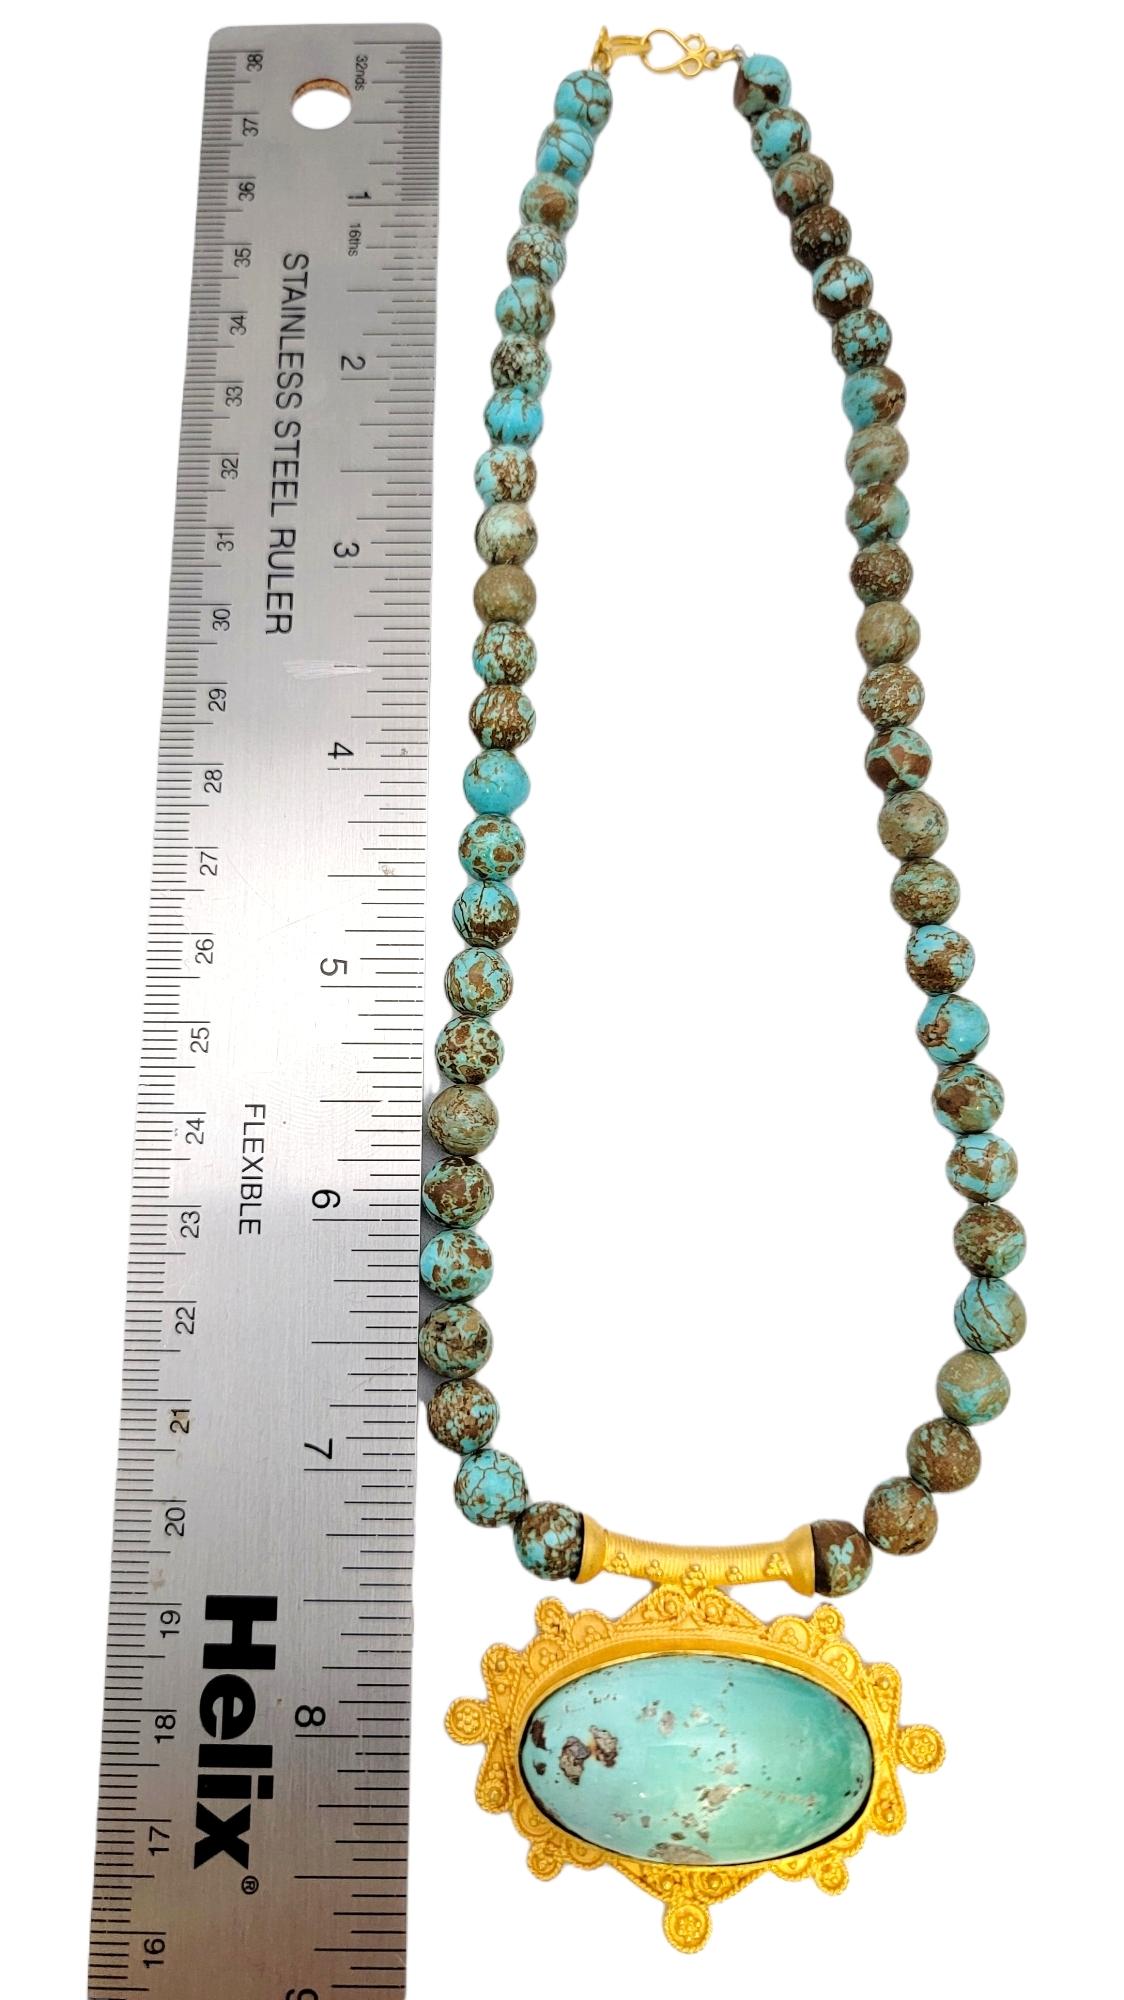 Natural Turquoise Beaded Necklace with Ornate 18 Karat Yellow Gold Pendant For Sale 7